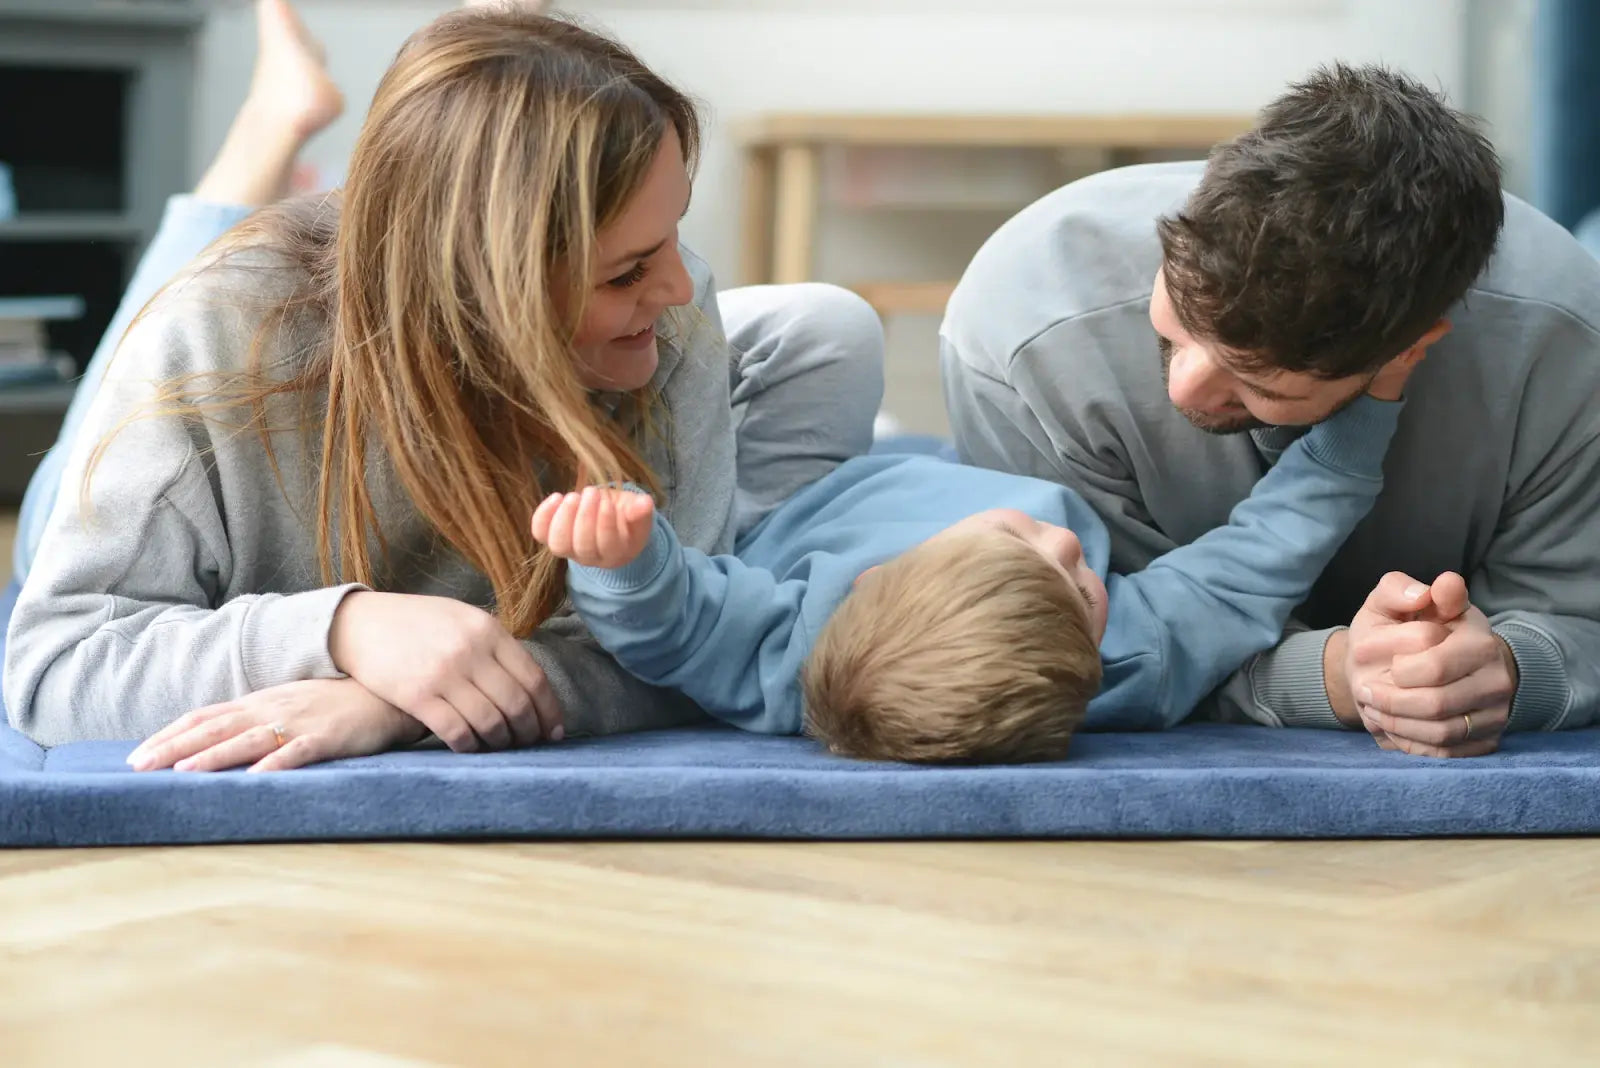 Snug Rugs: The Waterproof Play Mat That Combines Functionality with Plush Rug Comfort